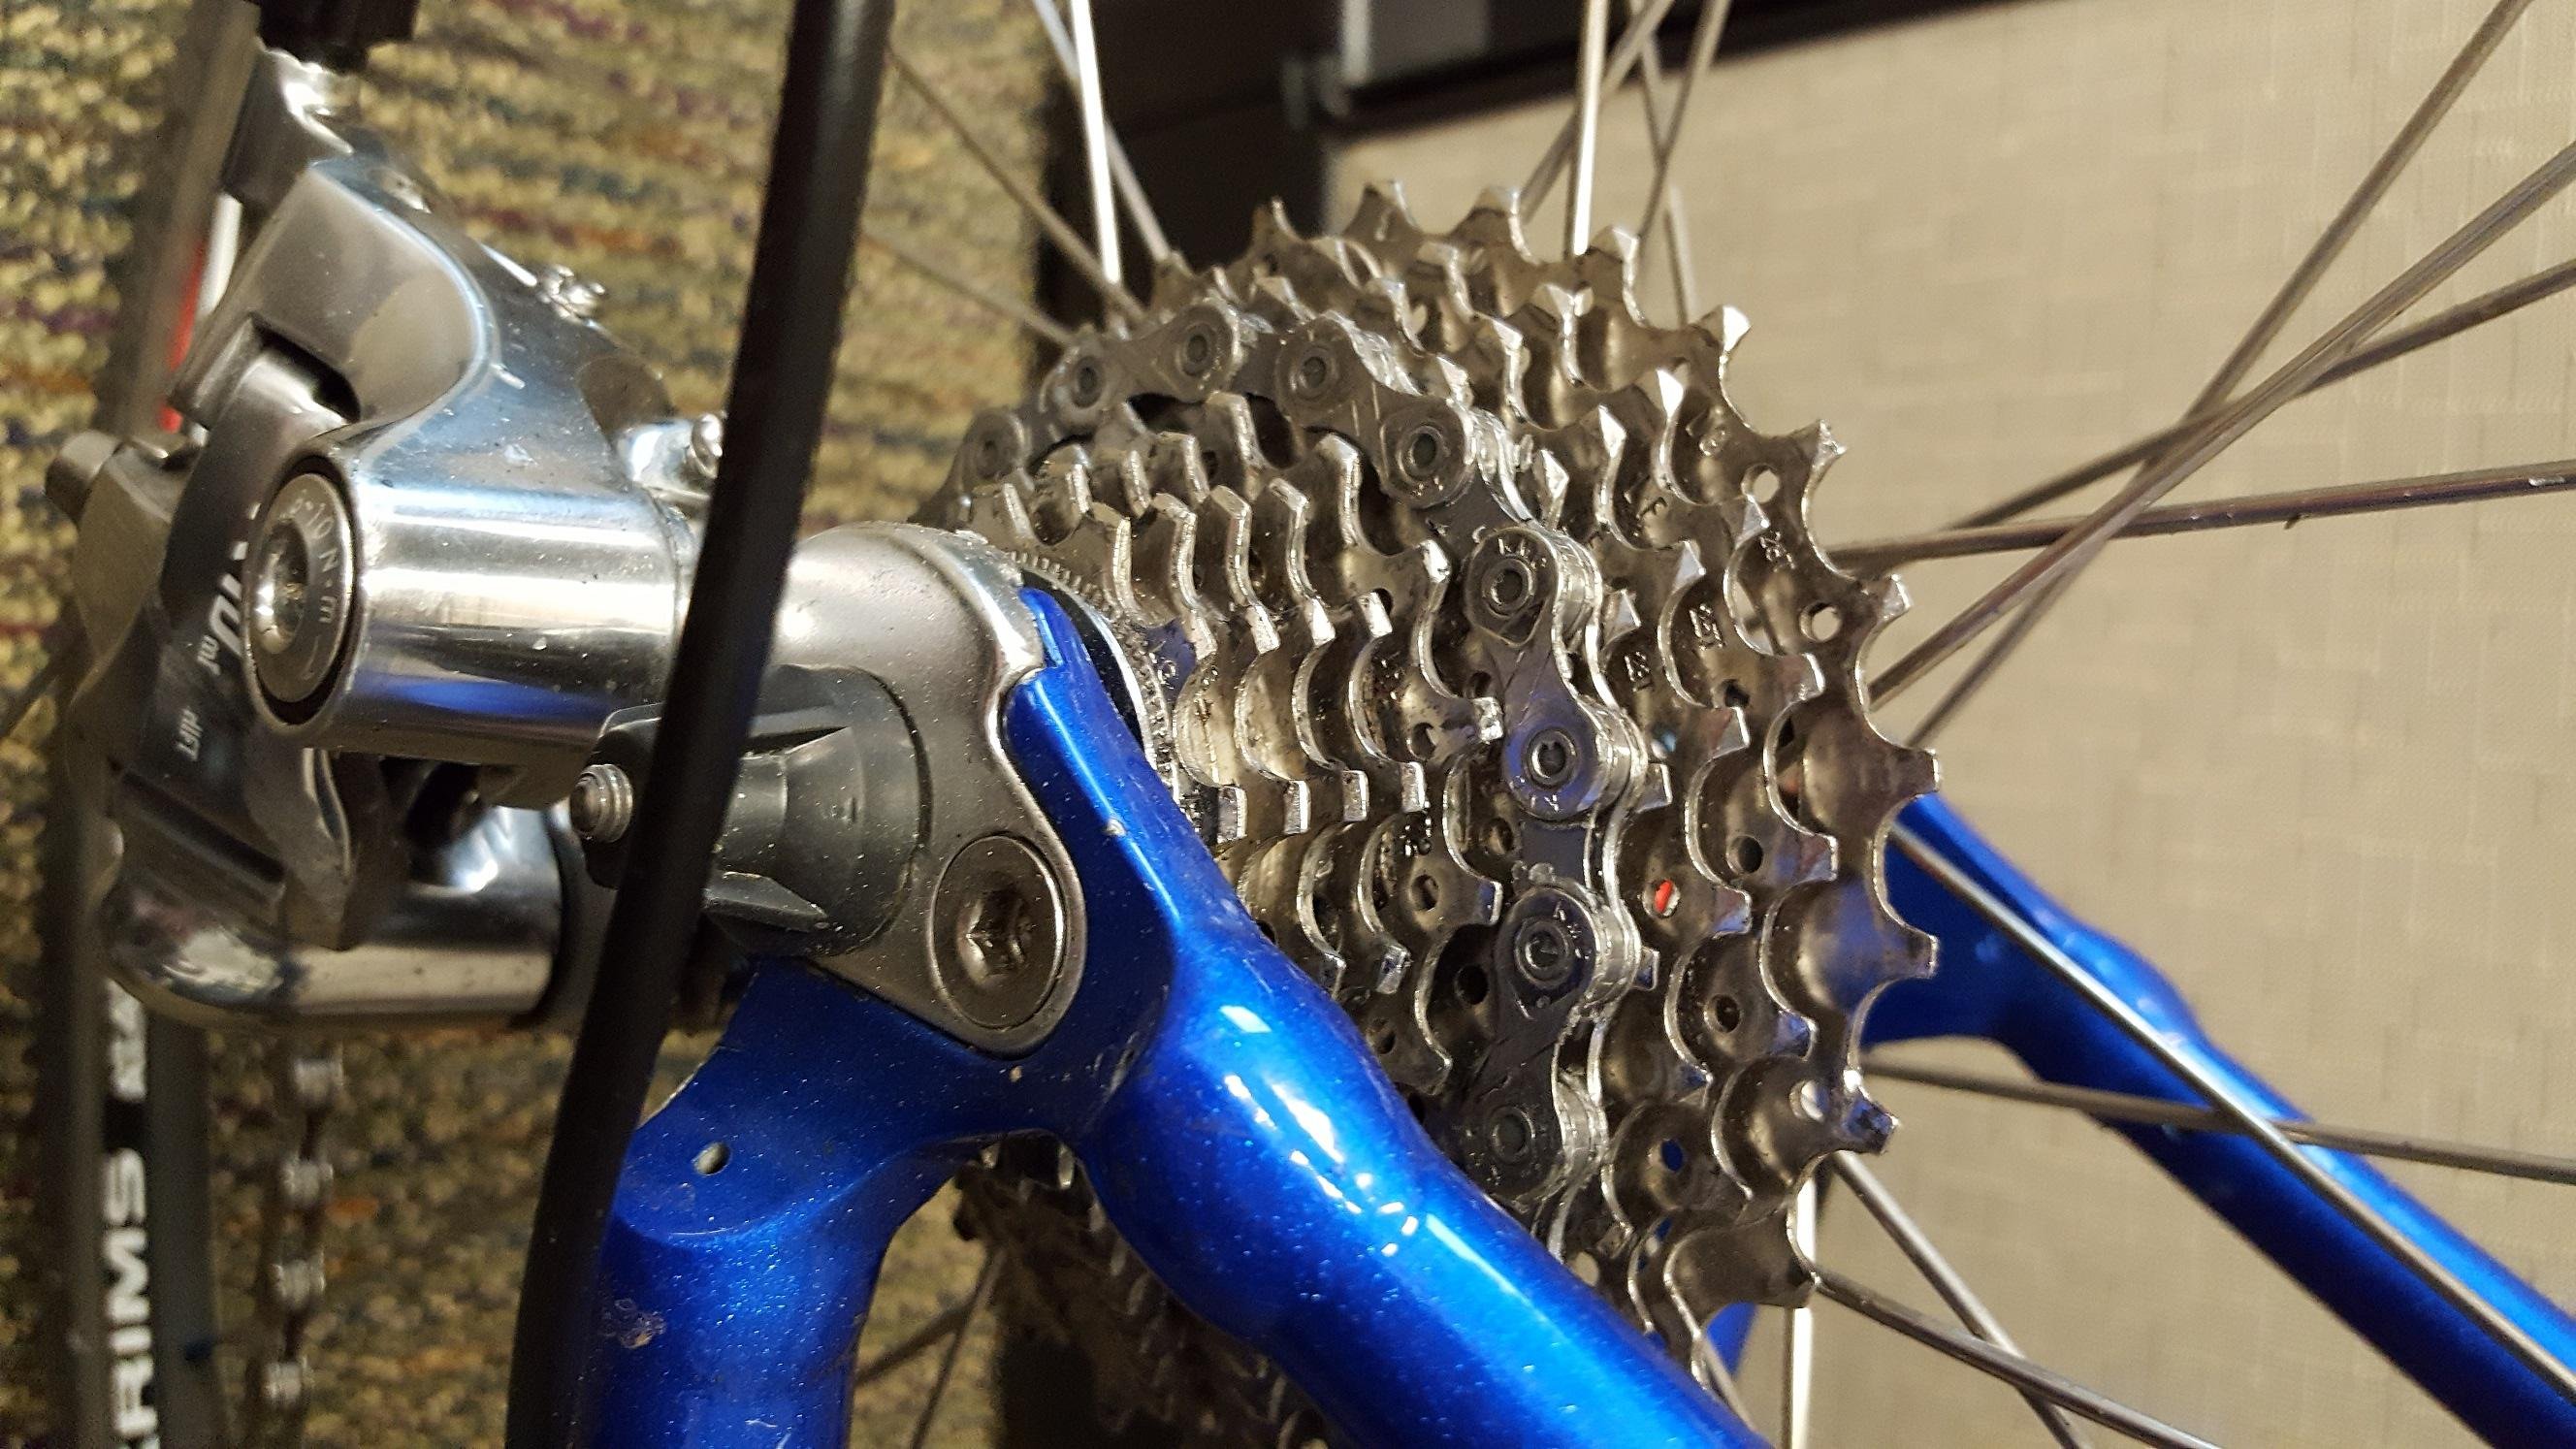 Clean chain and cassette thanks to wax